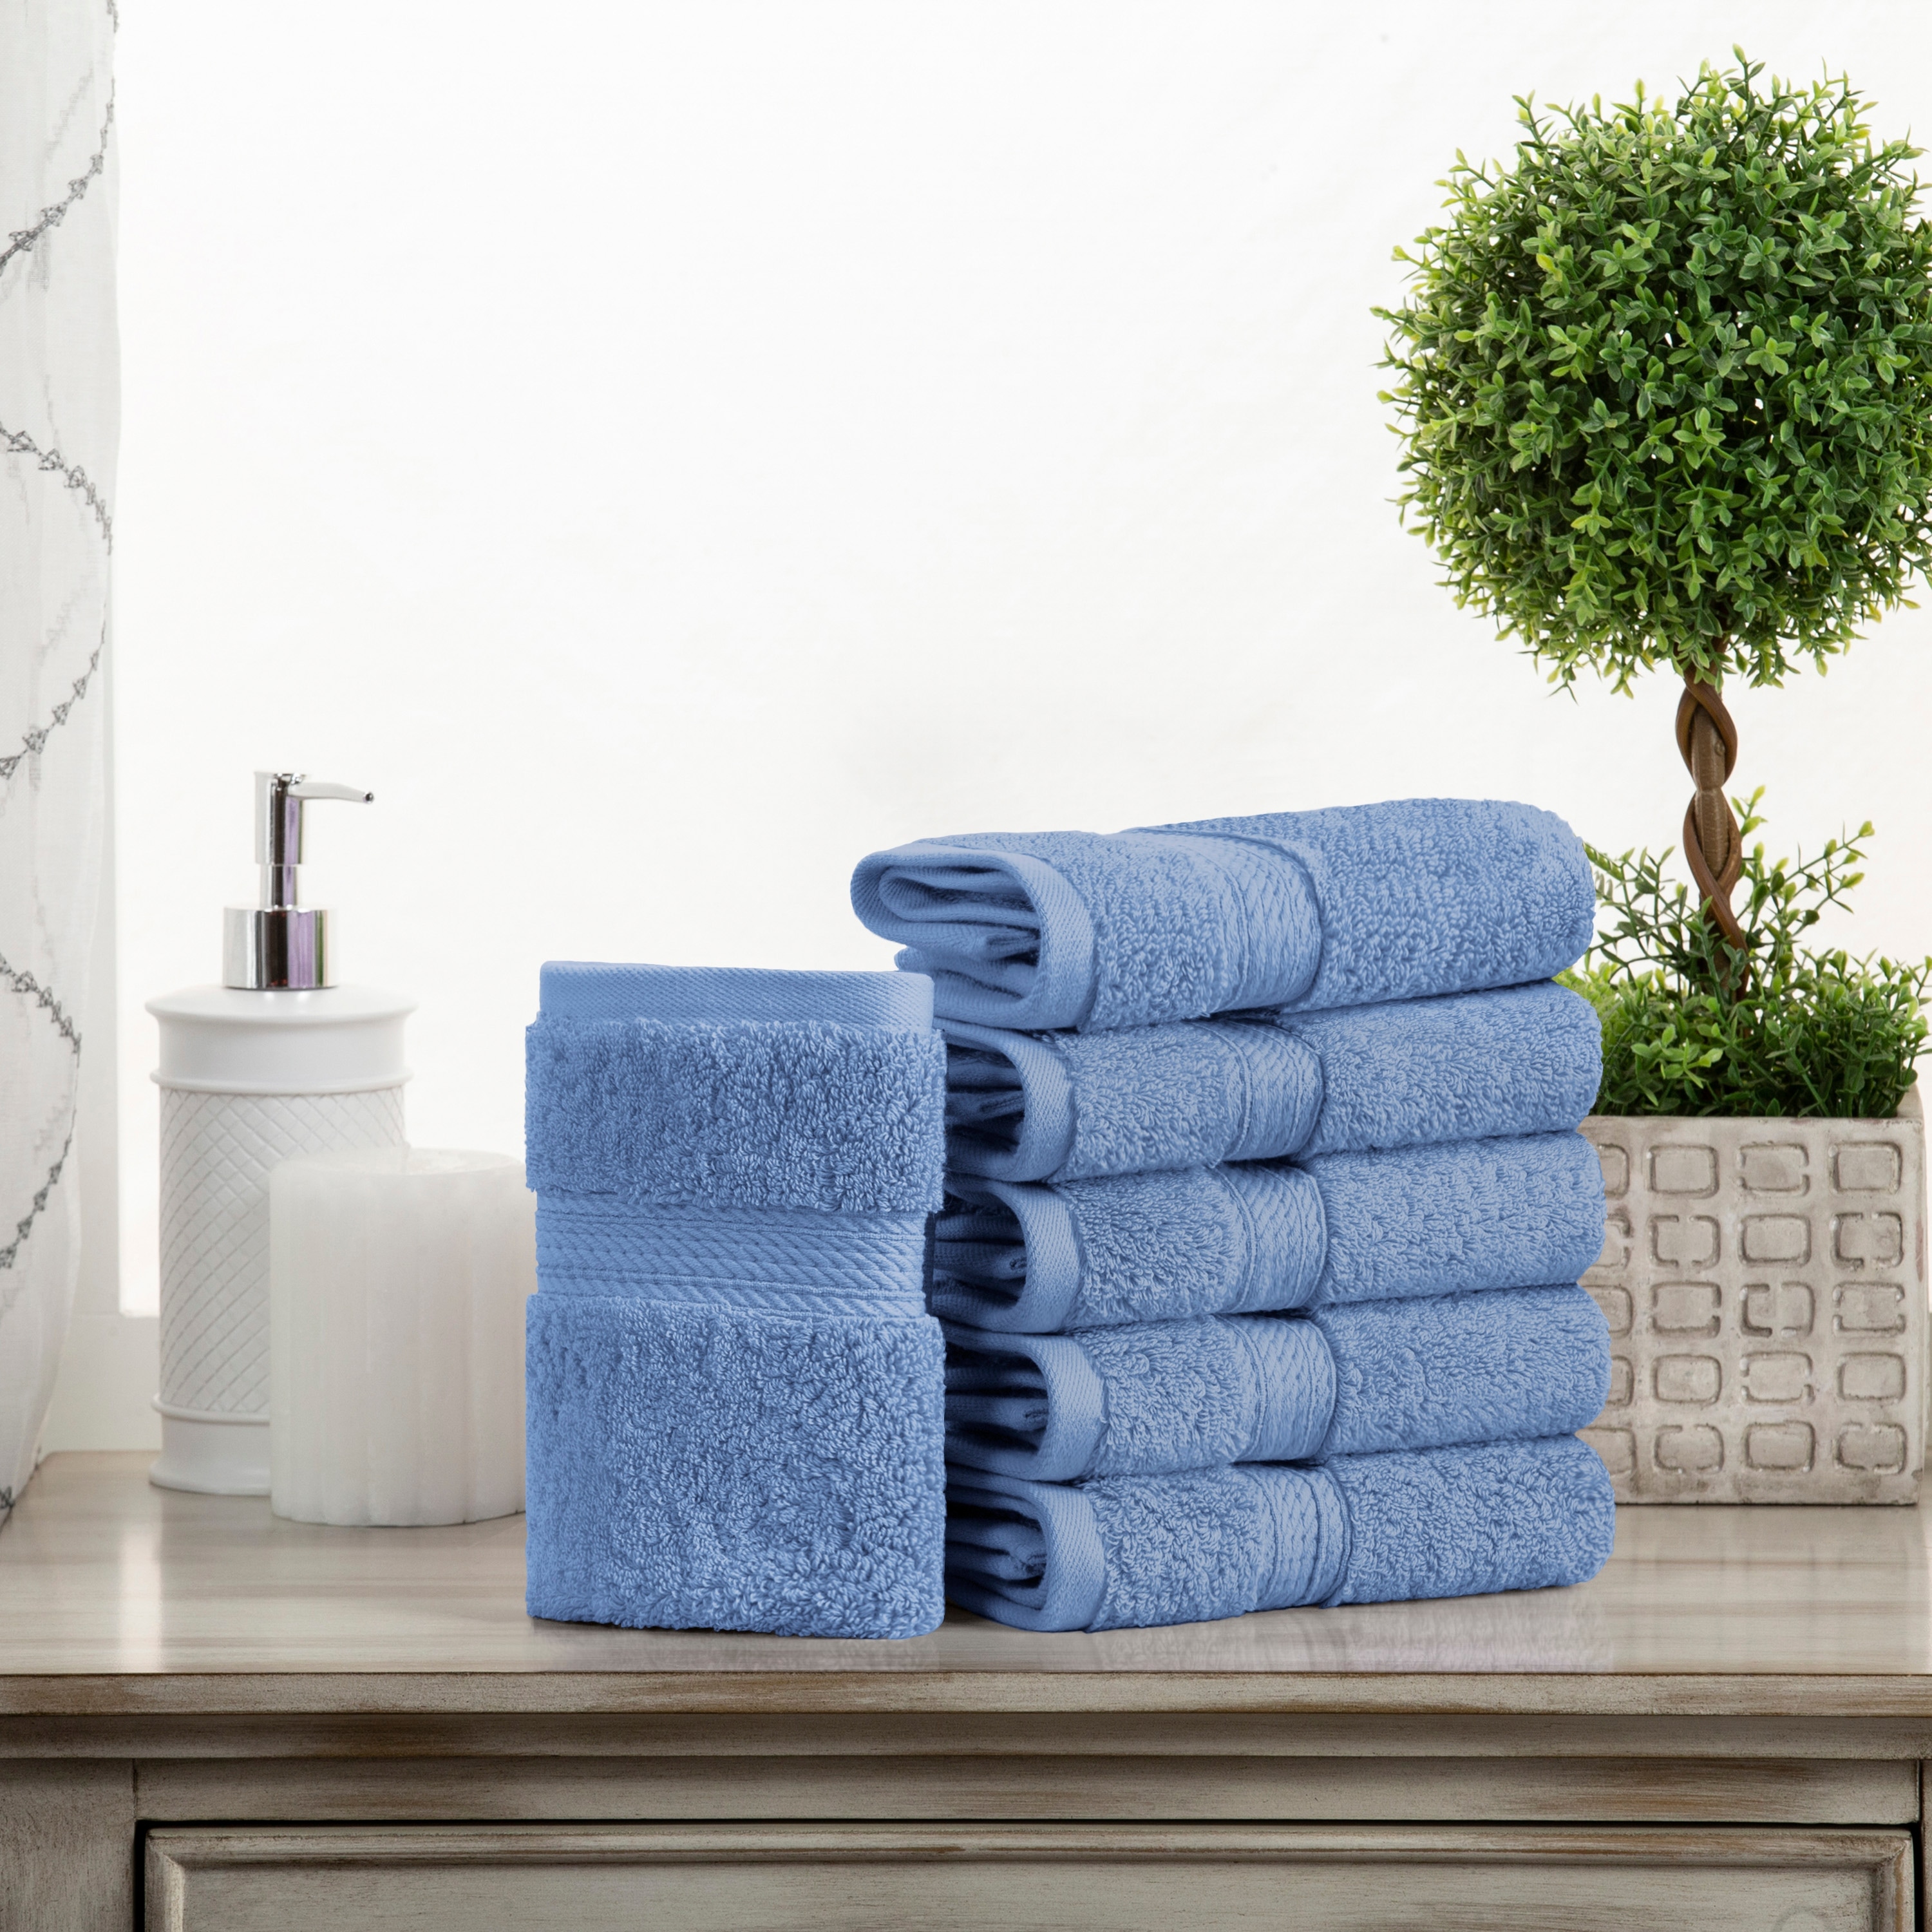 https://ak1.ostkcdn.com/images/products/is/images/direct/55f86caf216bd5cff4e26561fc517fbcaa73349a/Miranda-Haus-Marche-Egyptian-Cotton-Face-Towel-Set.jpg